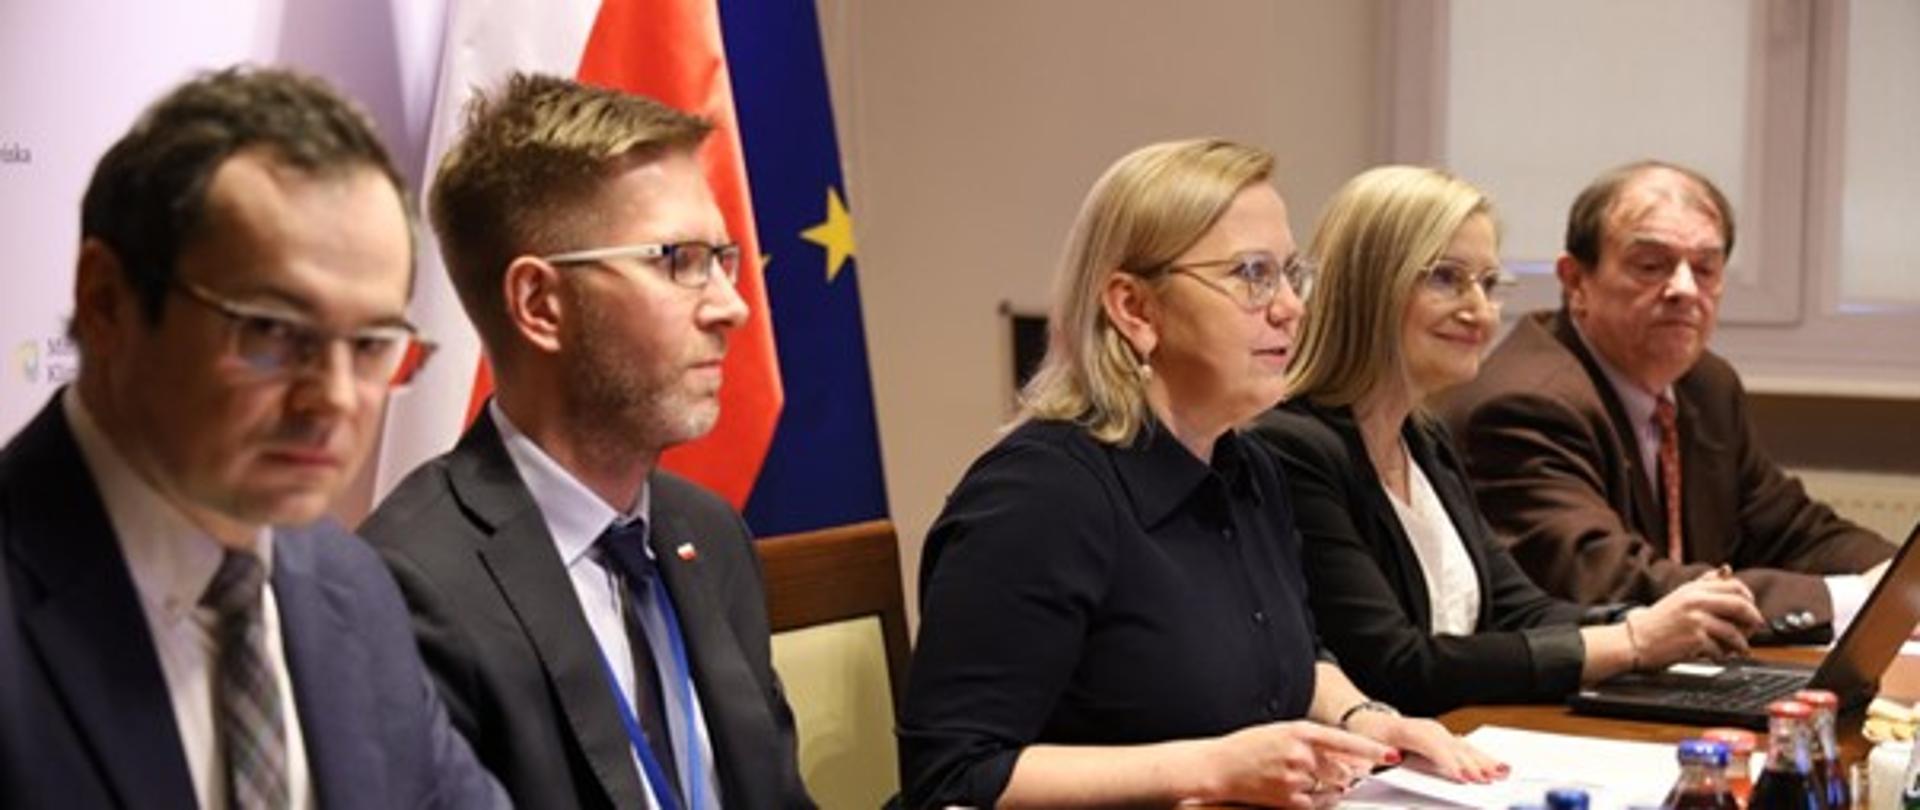 Talk between the Environment Ministers of Poland and Germany